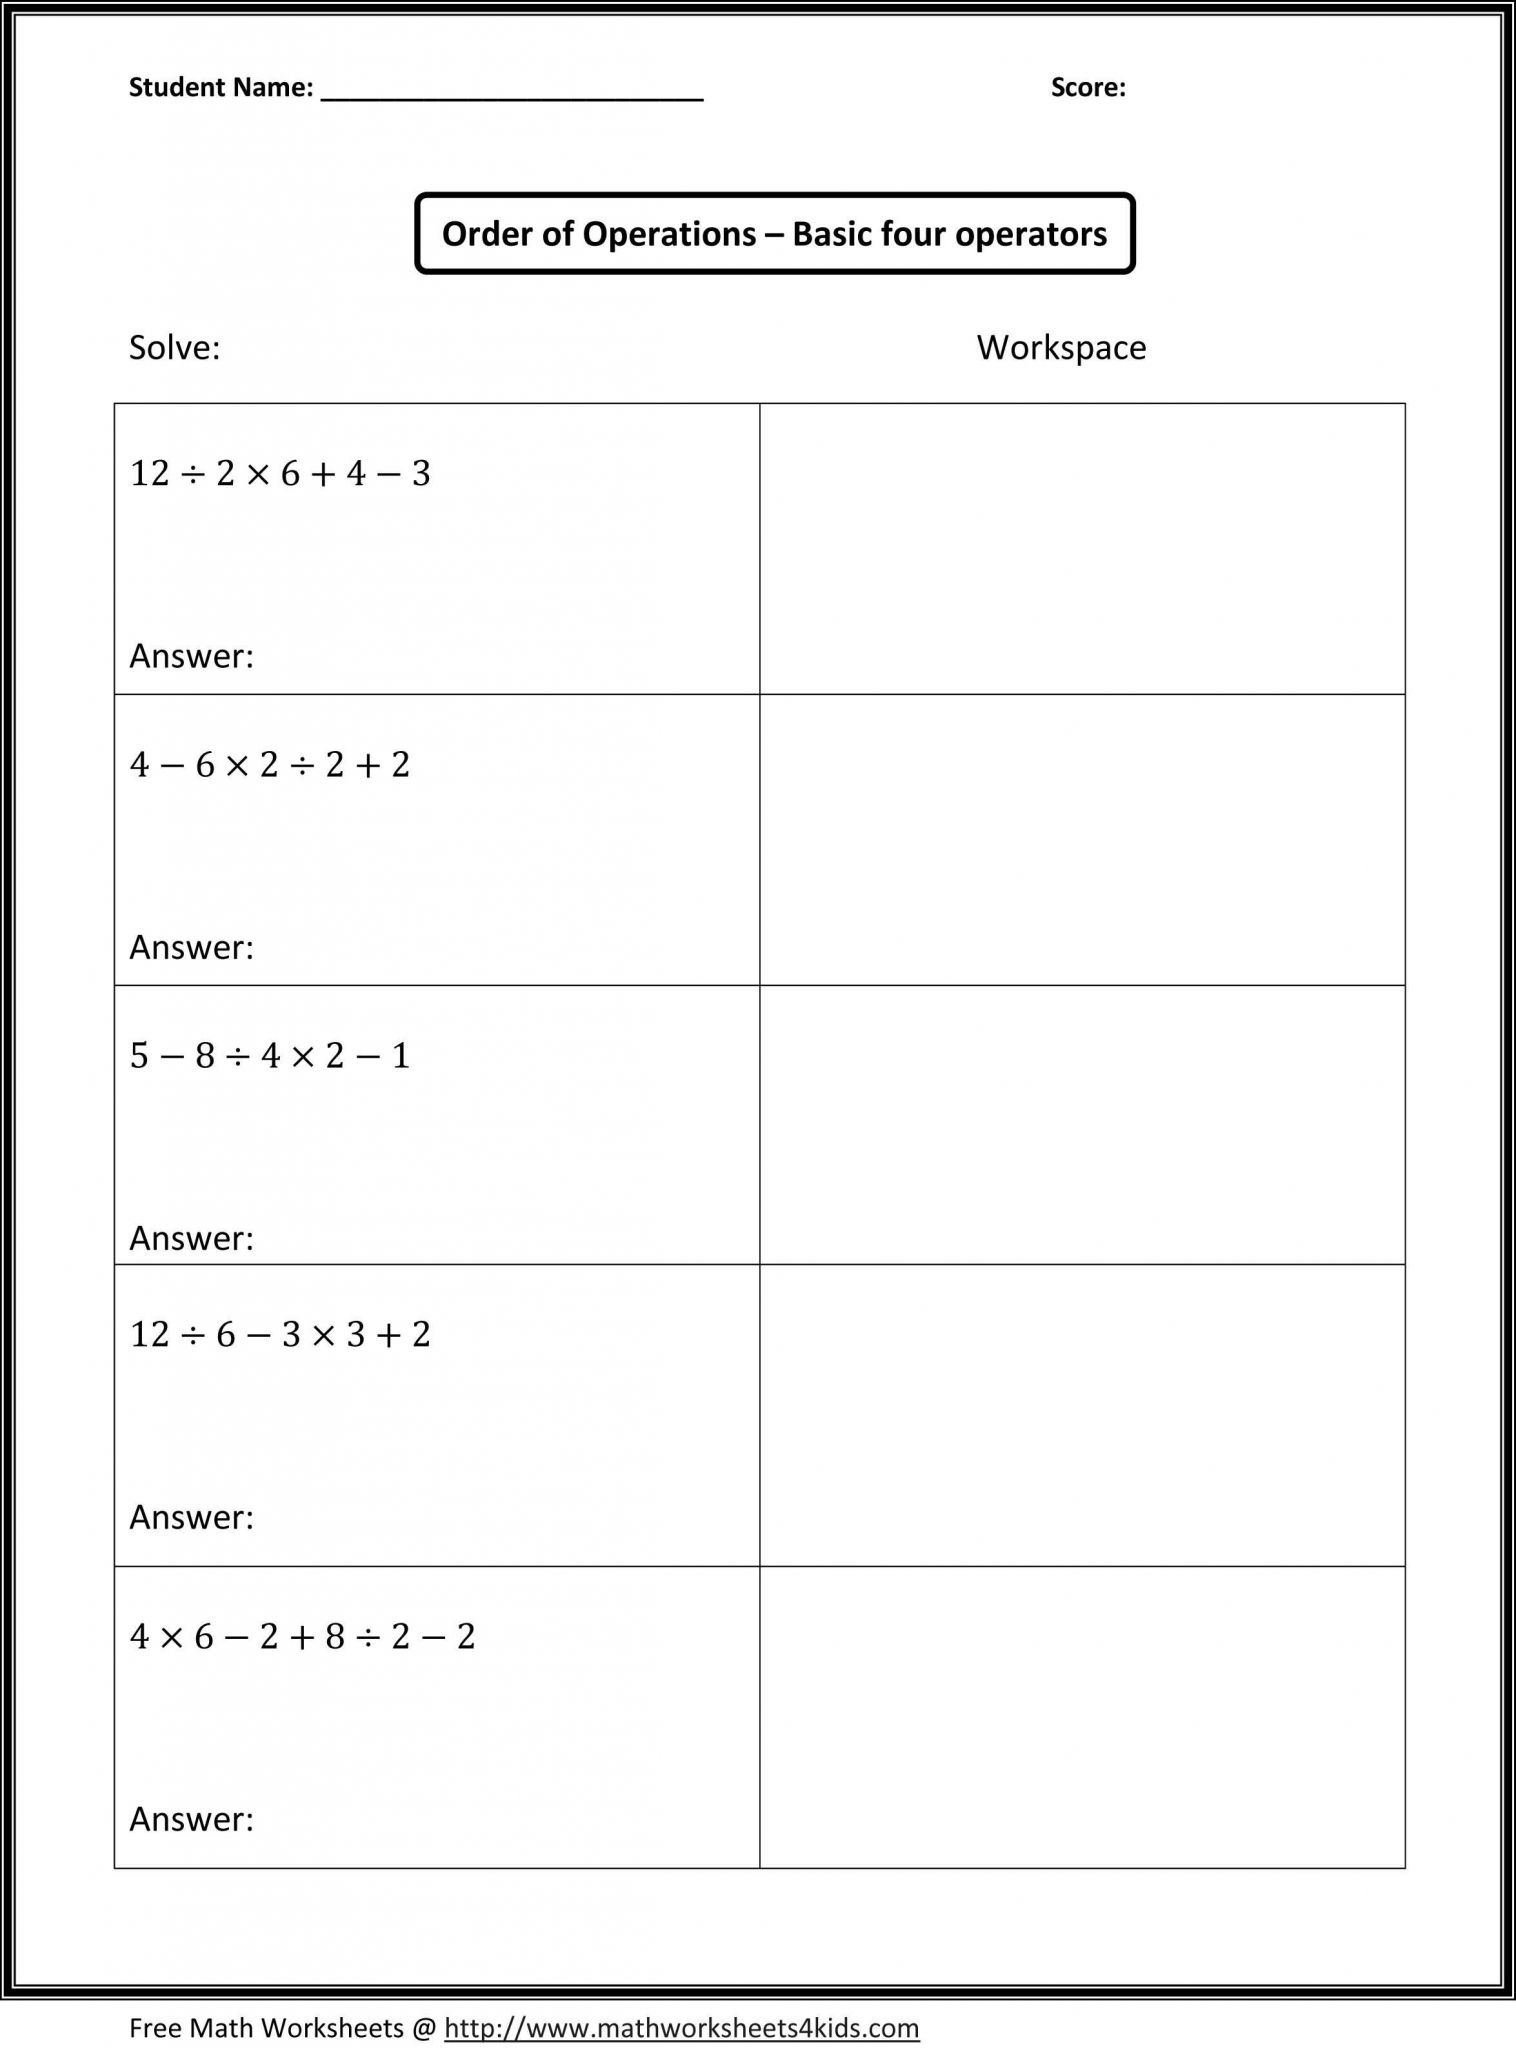 Factoring Distributive Property Worksheet Answers together with Additions Distributive Property Worksheetirational Properties